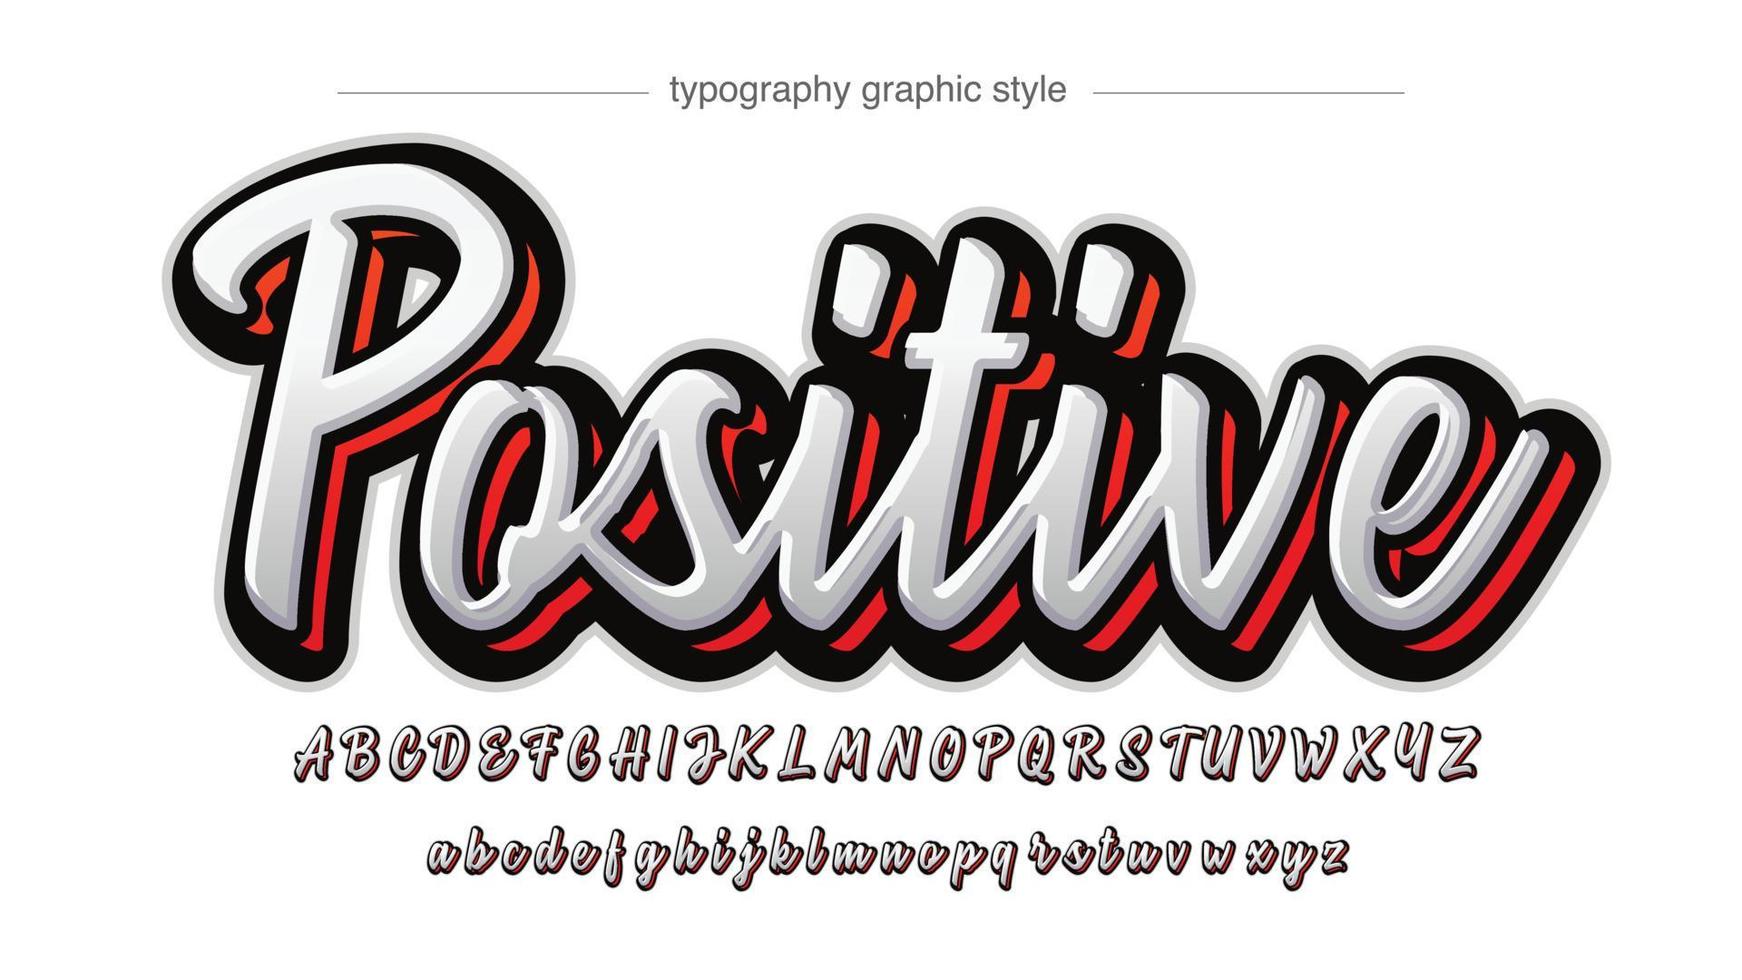 white and red 3d cursive calligraphy font vector